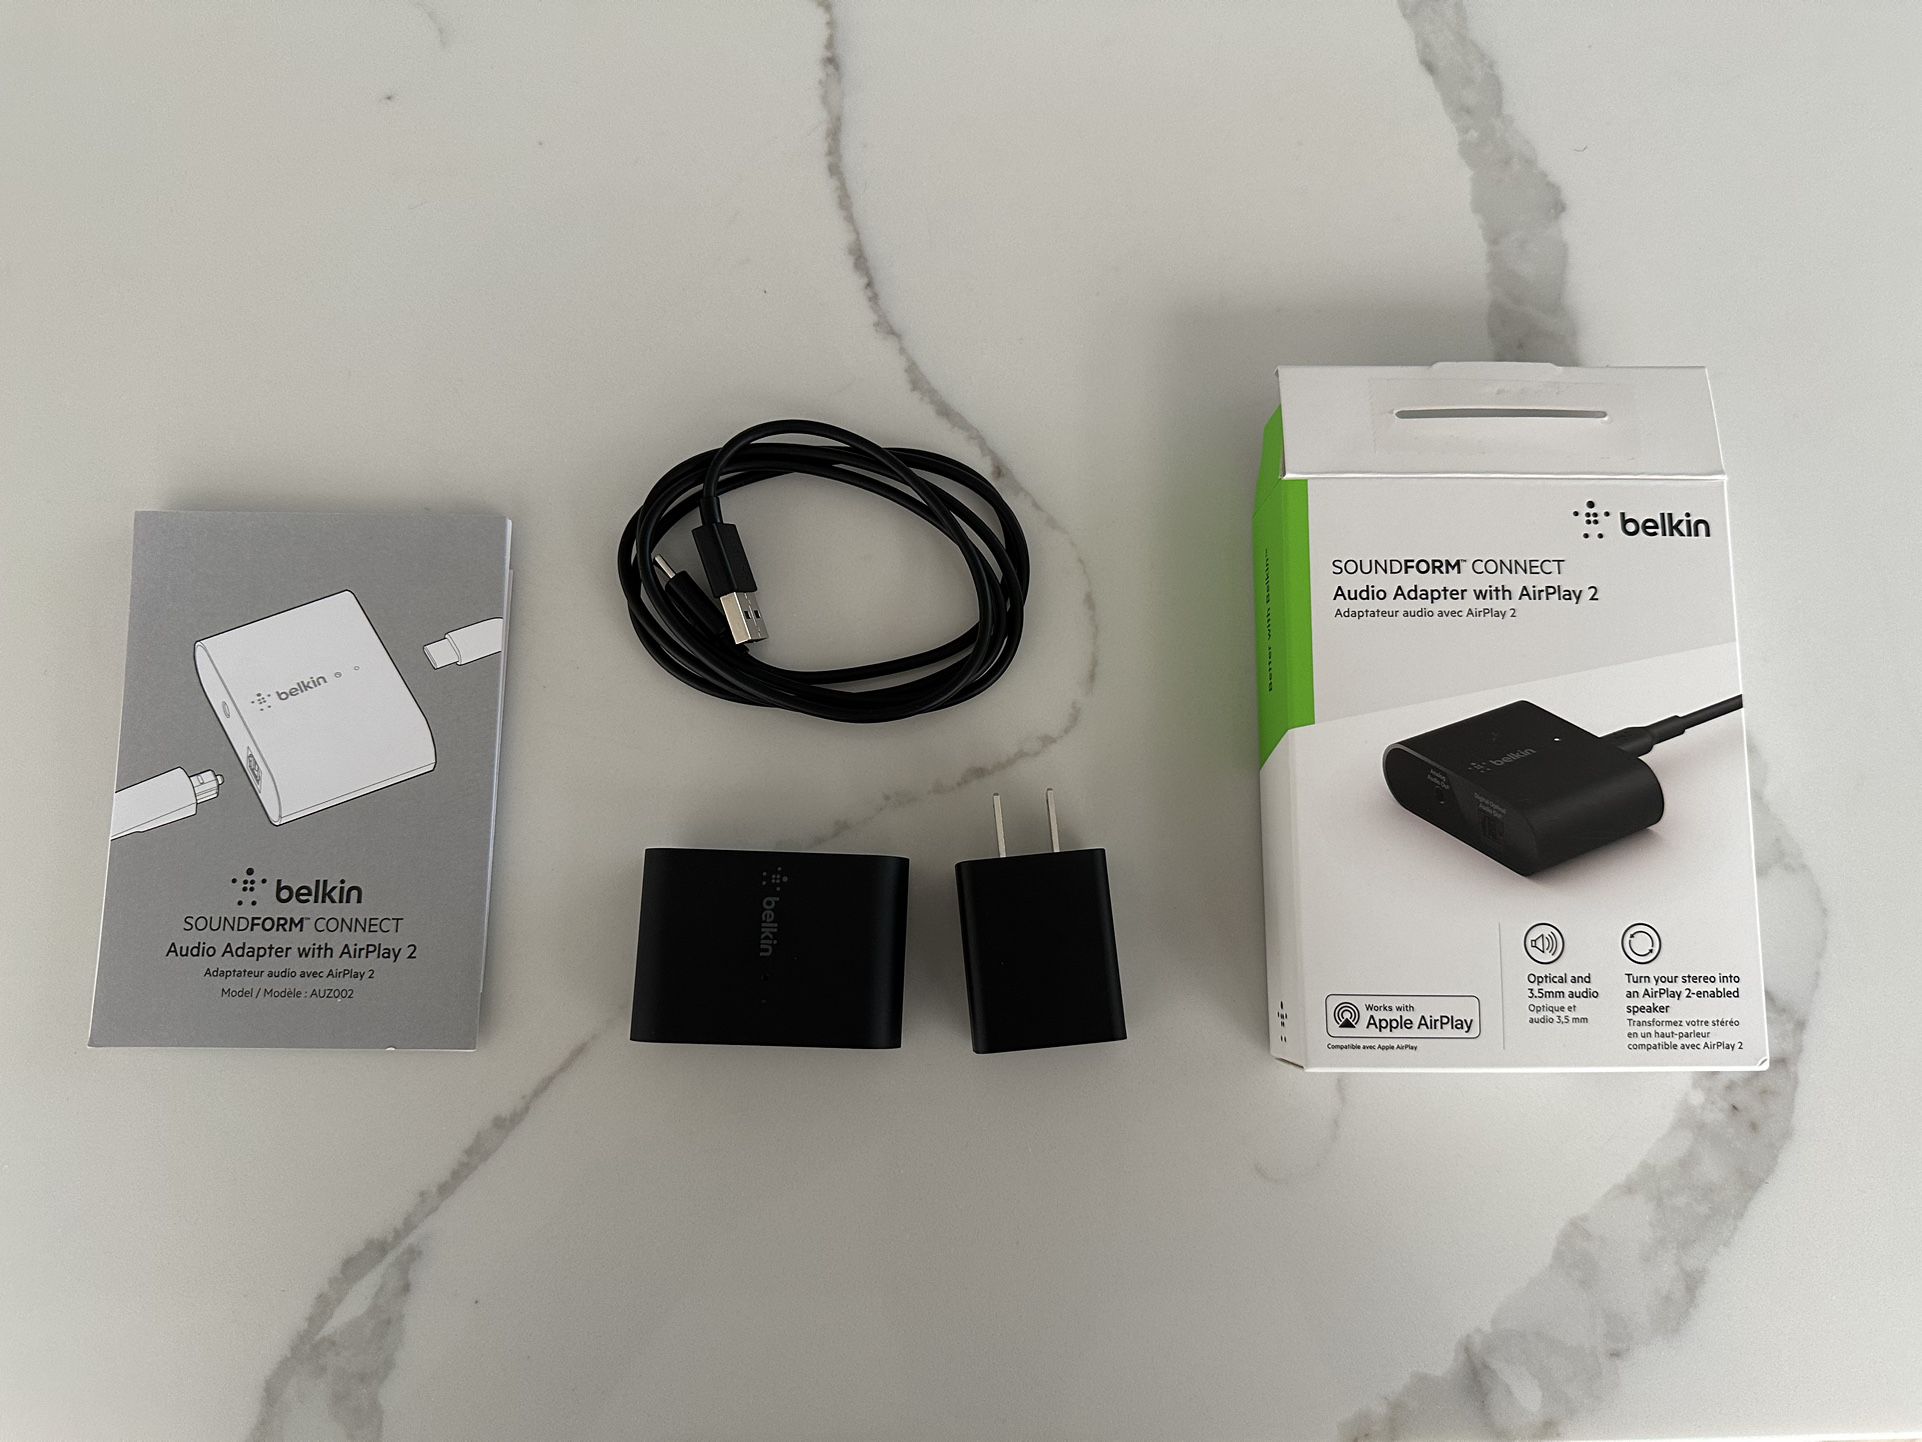 Belkin SOUNDFORM Connect Audio Adapter with AirPlay 2, USB-C to